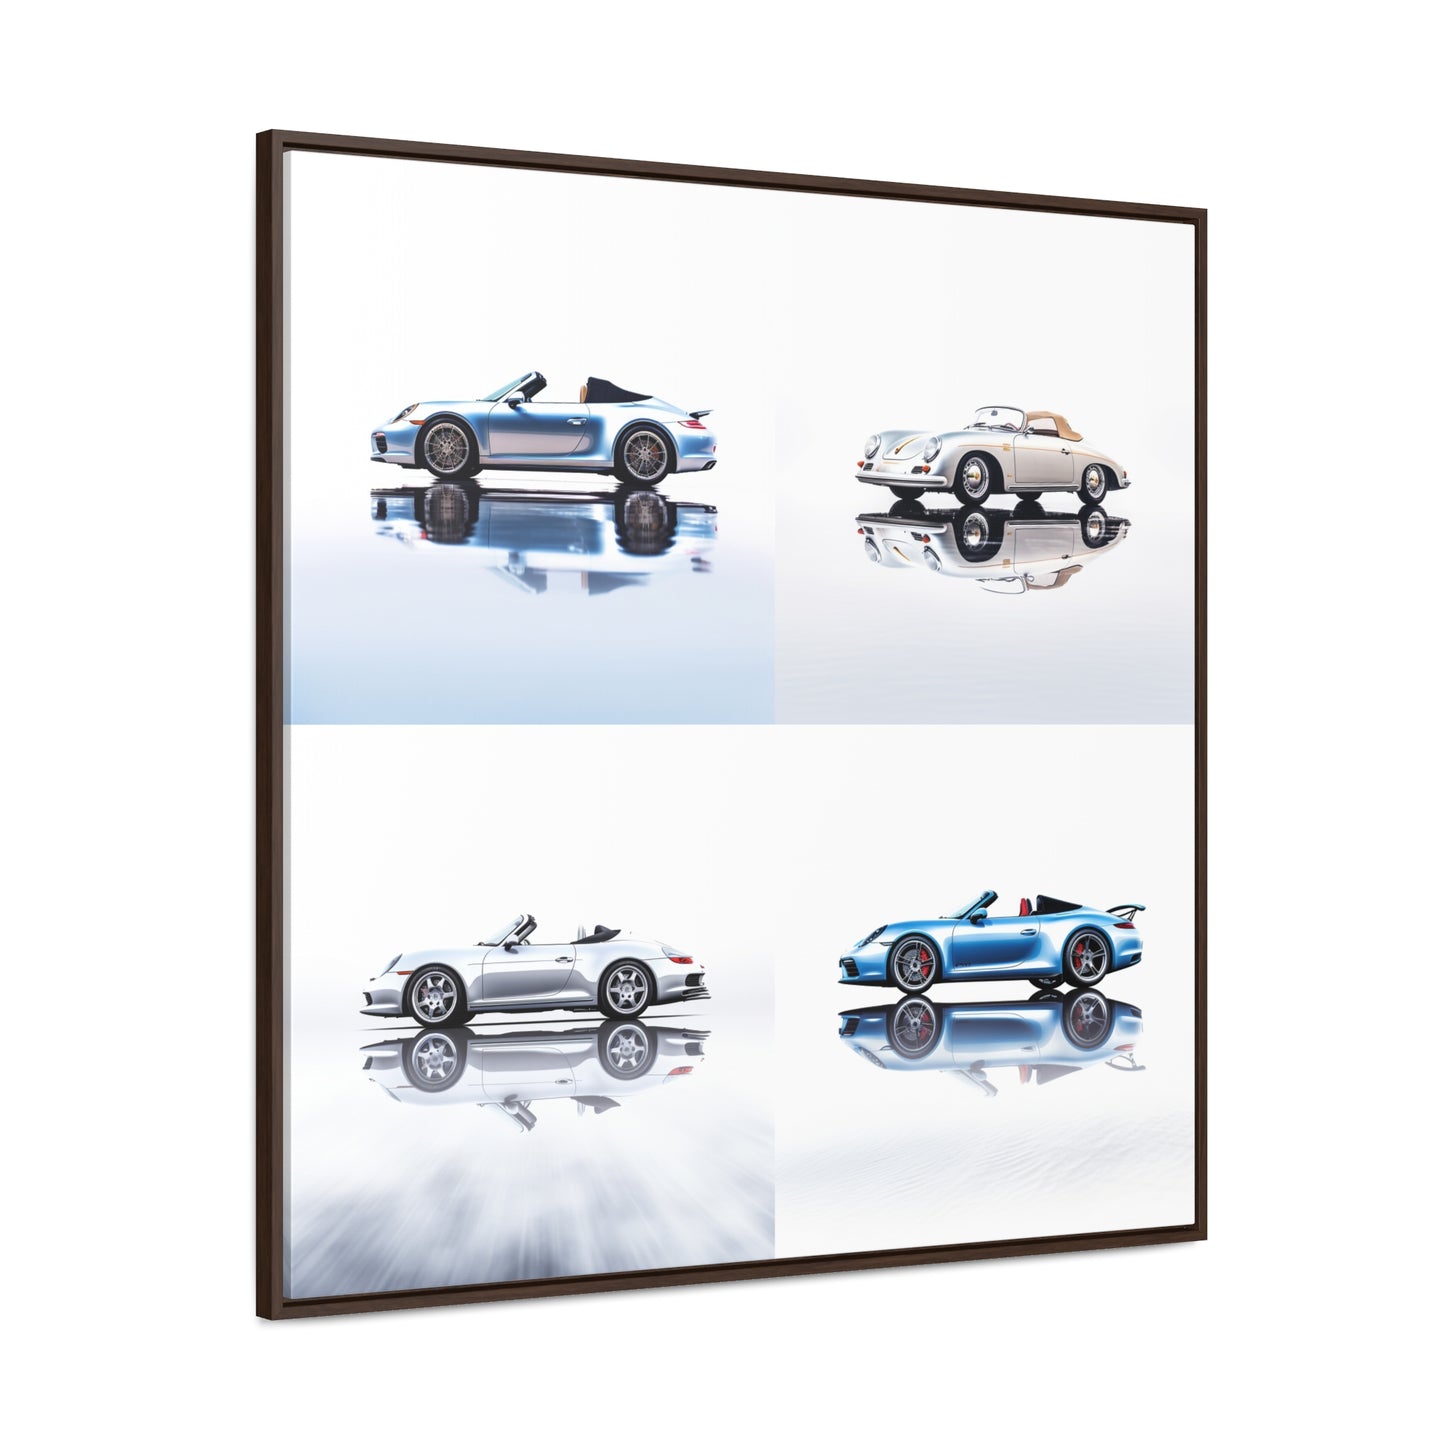 Gallery Canvas Wraps, Square Frame 911 Speedster on water 5